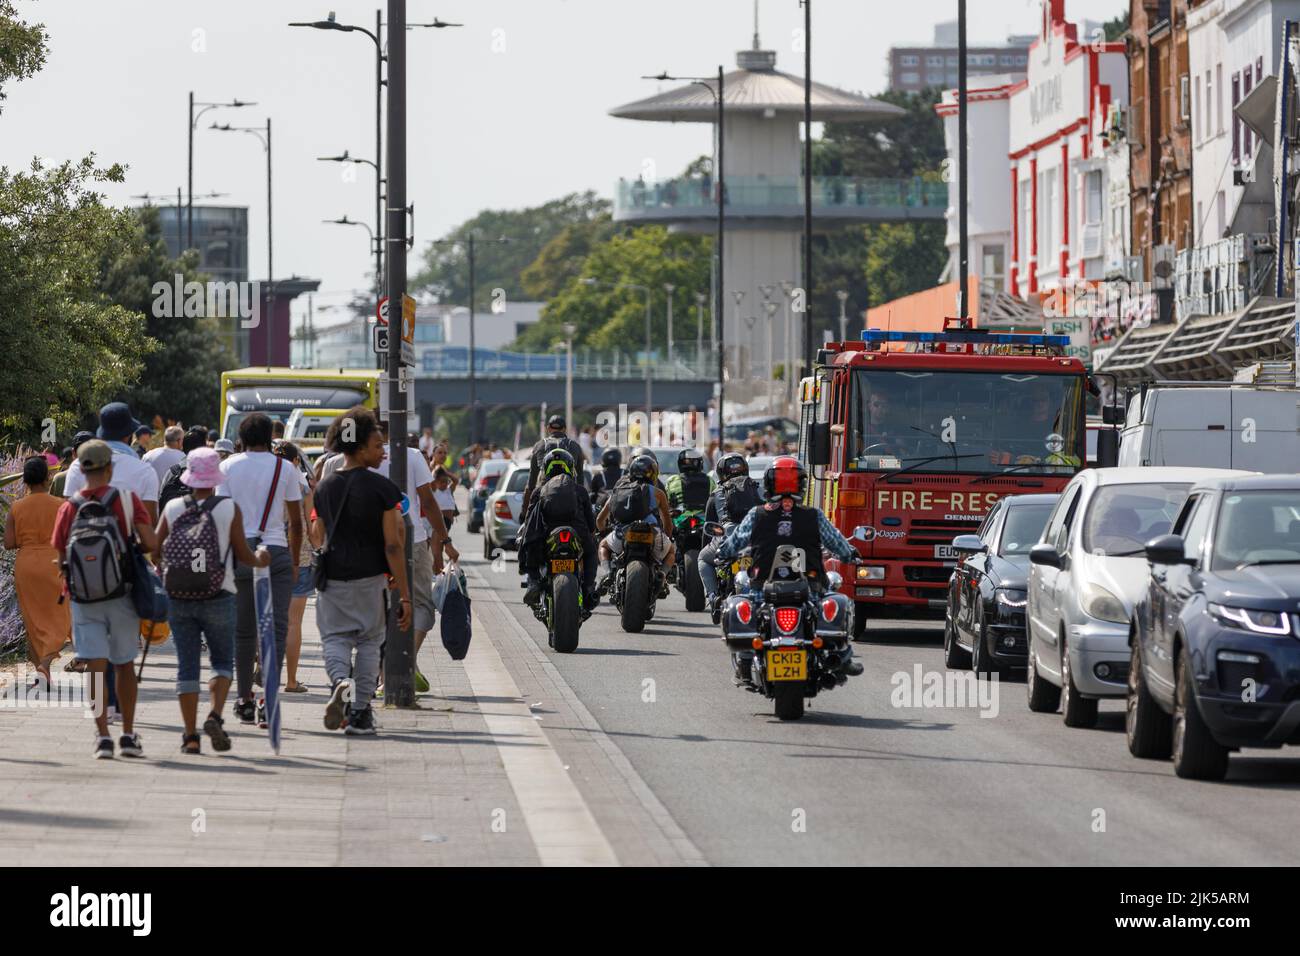 heatwave England. Traffic congestion with bikers, cars and fire engine on a busy road and pedestrians walking on a hot summer day in a English seaside Stock Photo